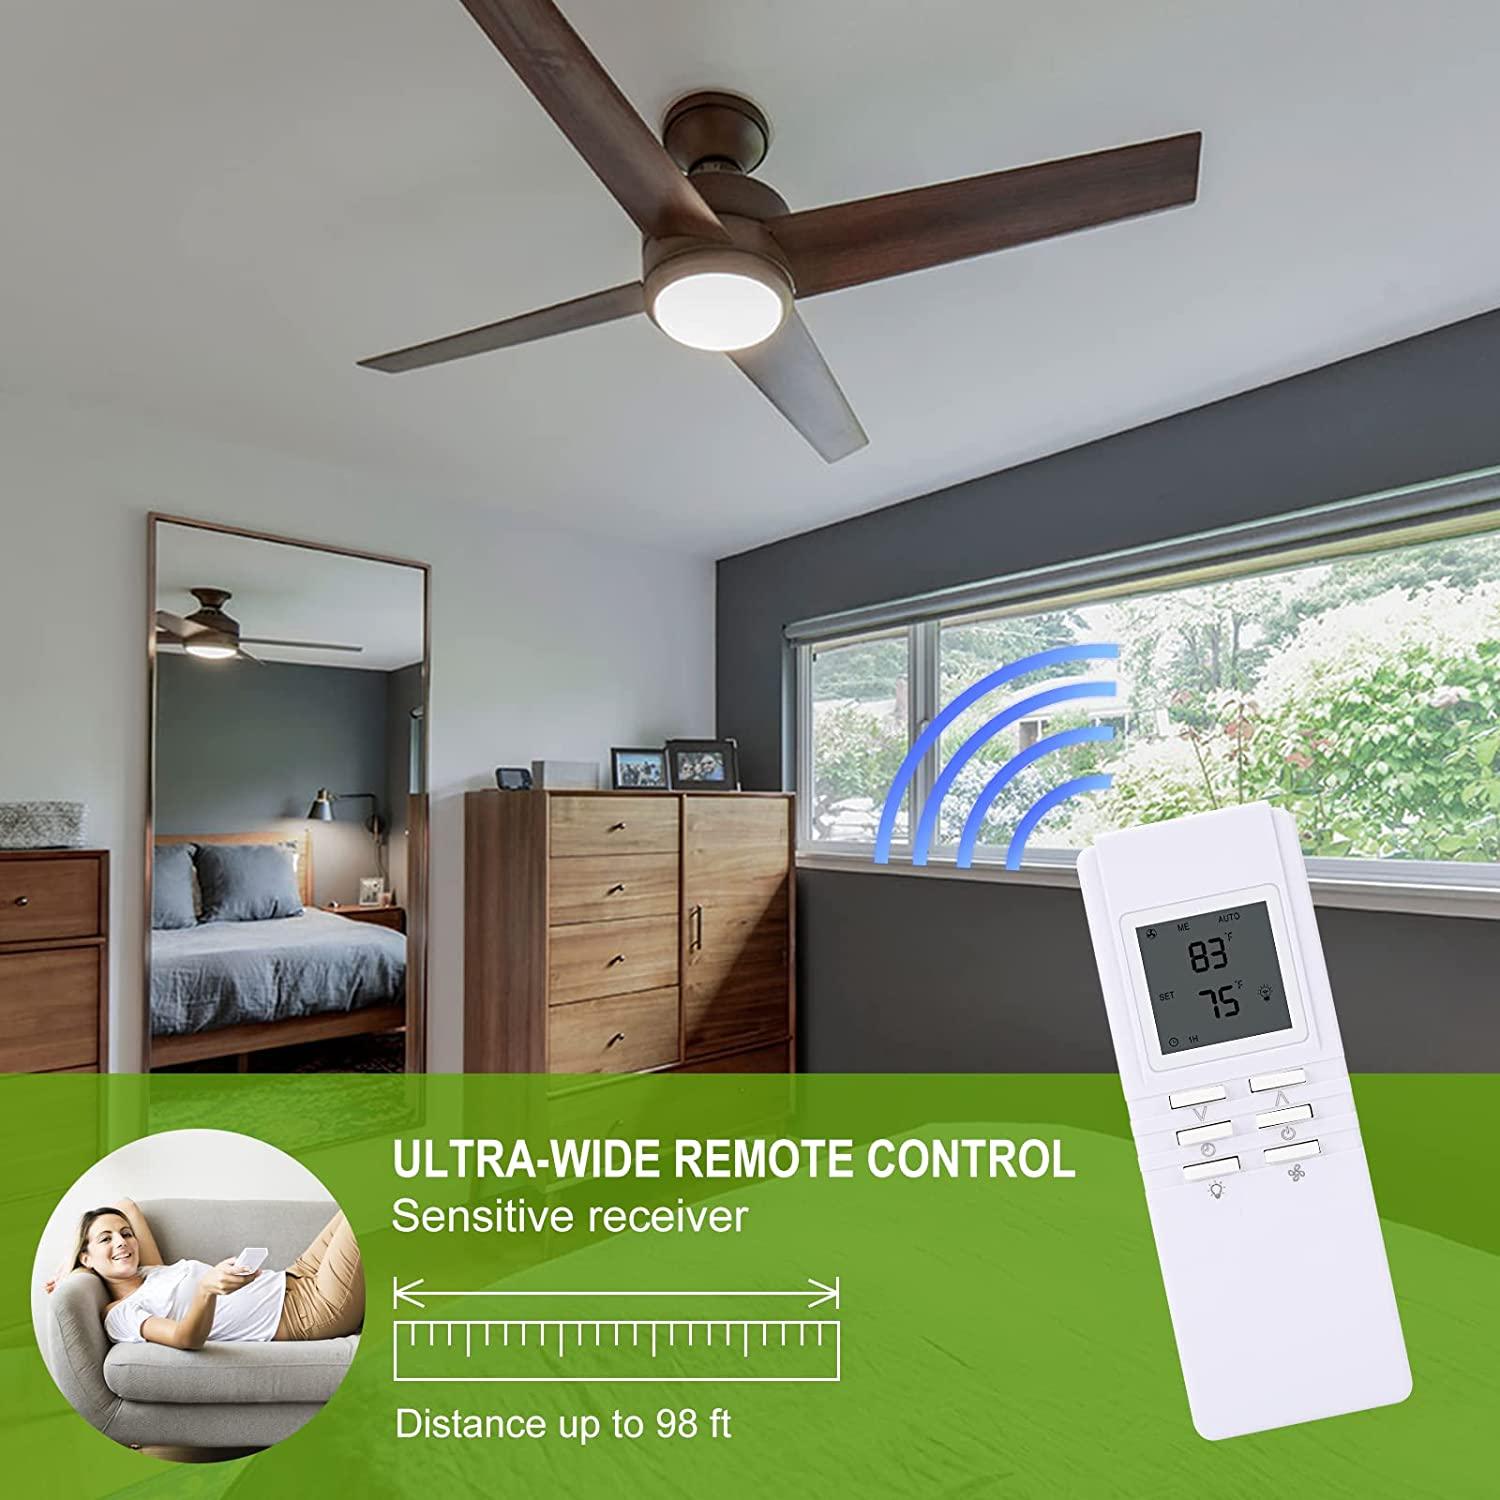 Ceiling Fan Remote Control Kit, Briidea 4-in-1 Universal Ceiling Fan Light Remote Kit with Temperature Control, Compatible with Hampton Bay, Hunter, Westinghouse, Honeywell Ceiling Fan Light - briidea